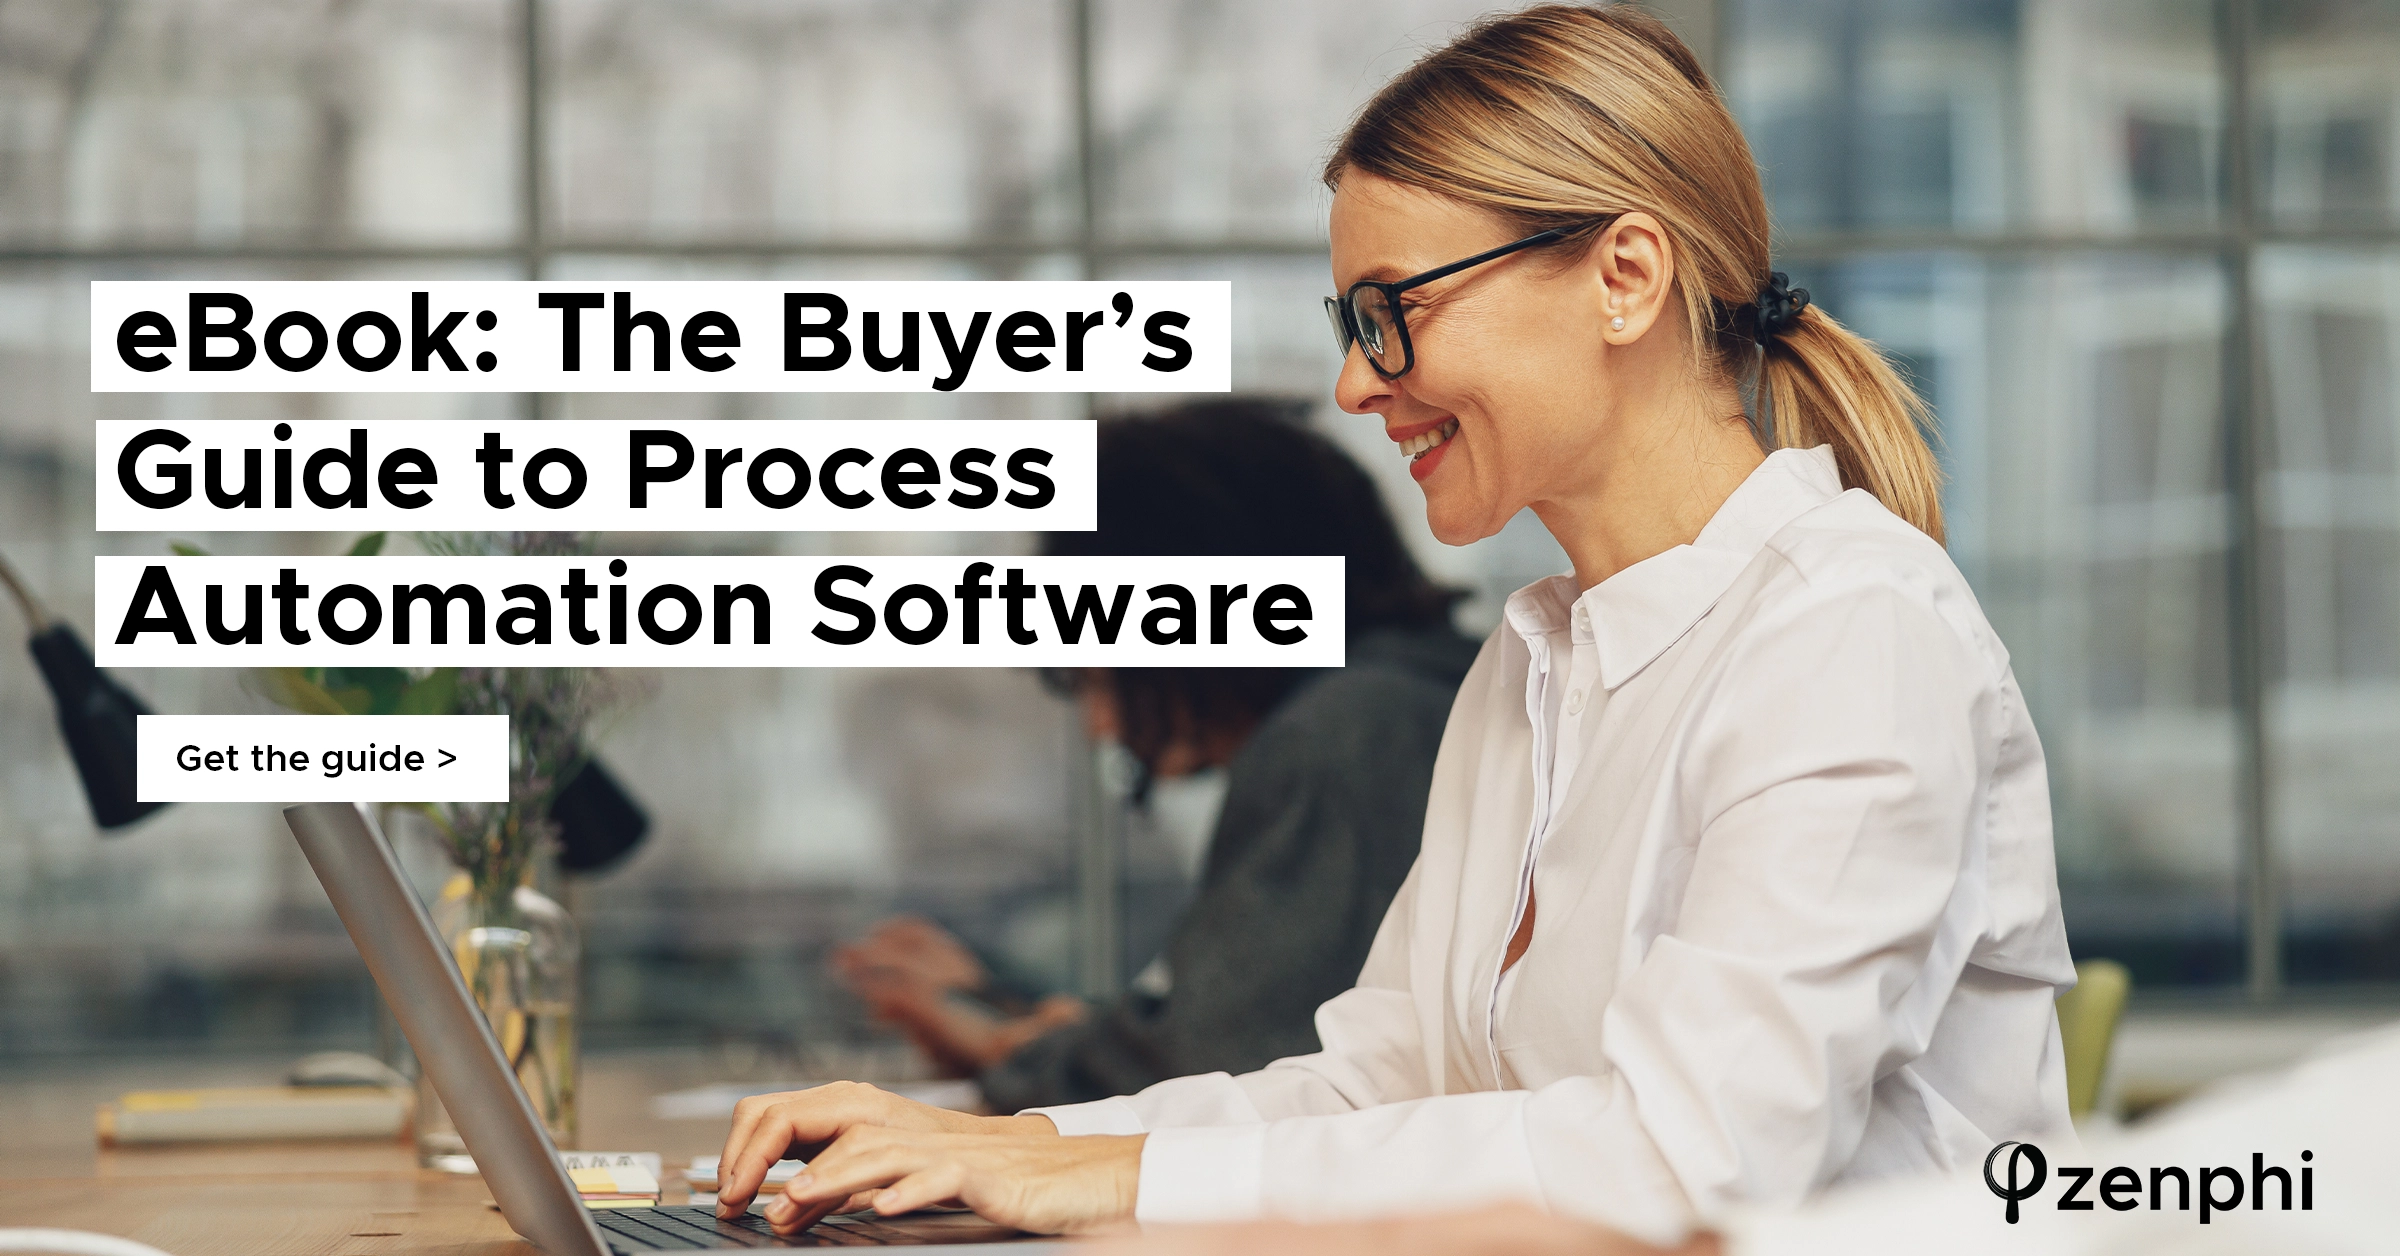 The buyer's guide to process automation software